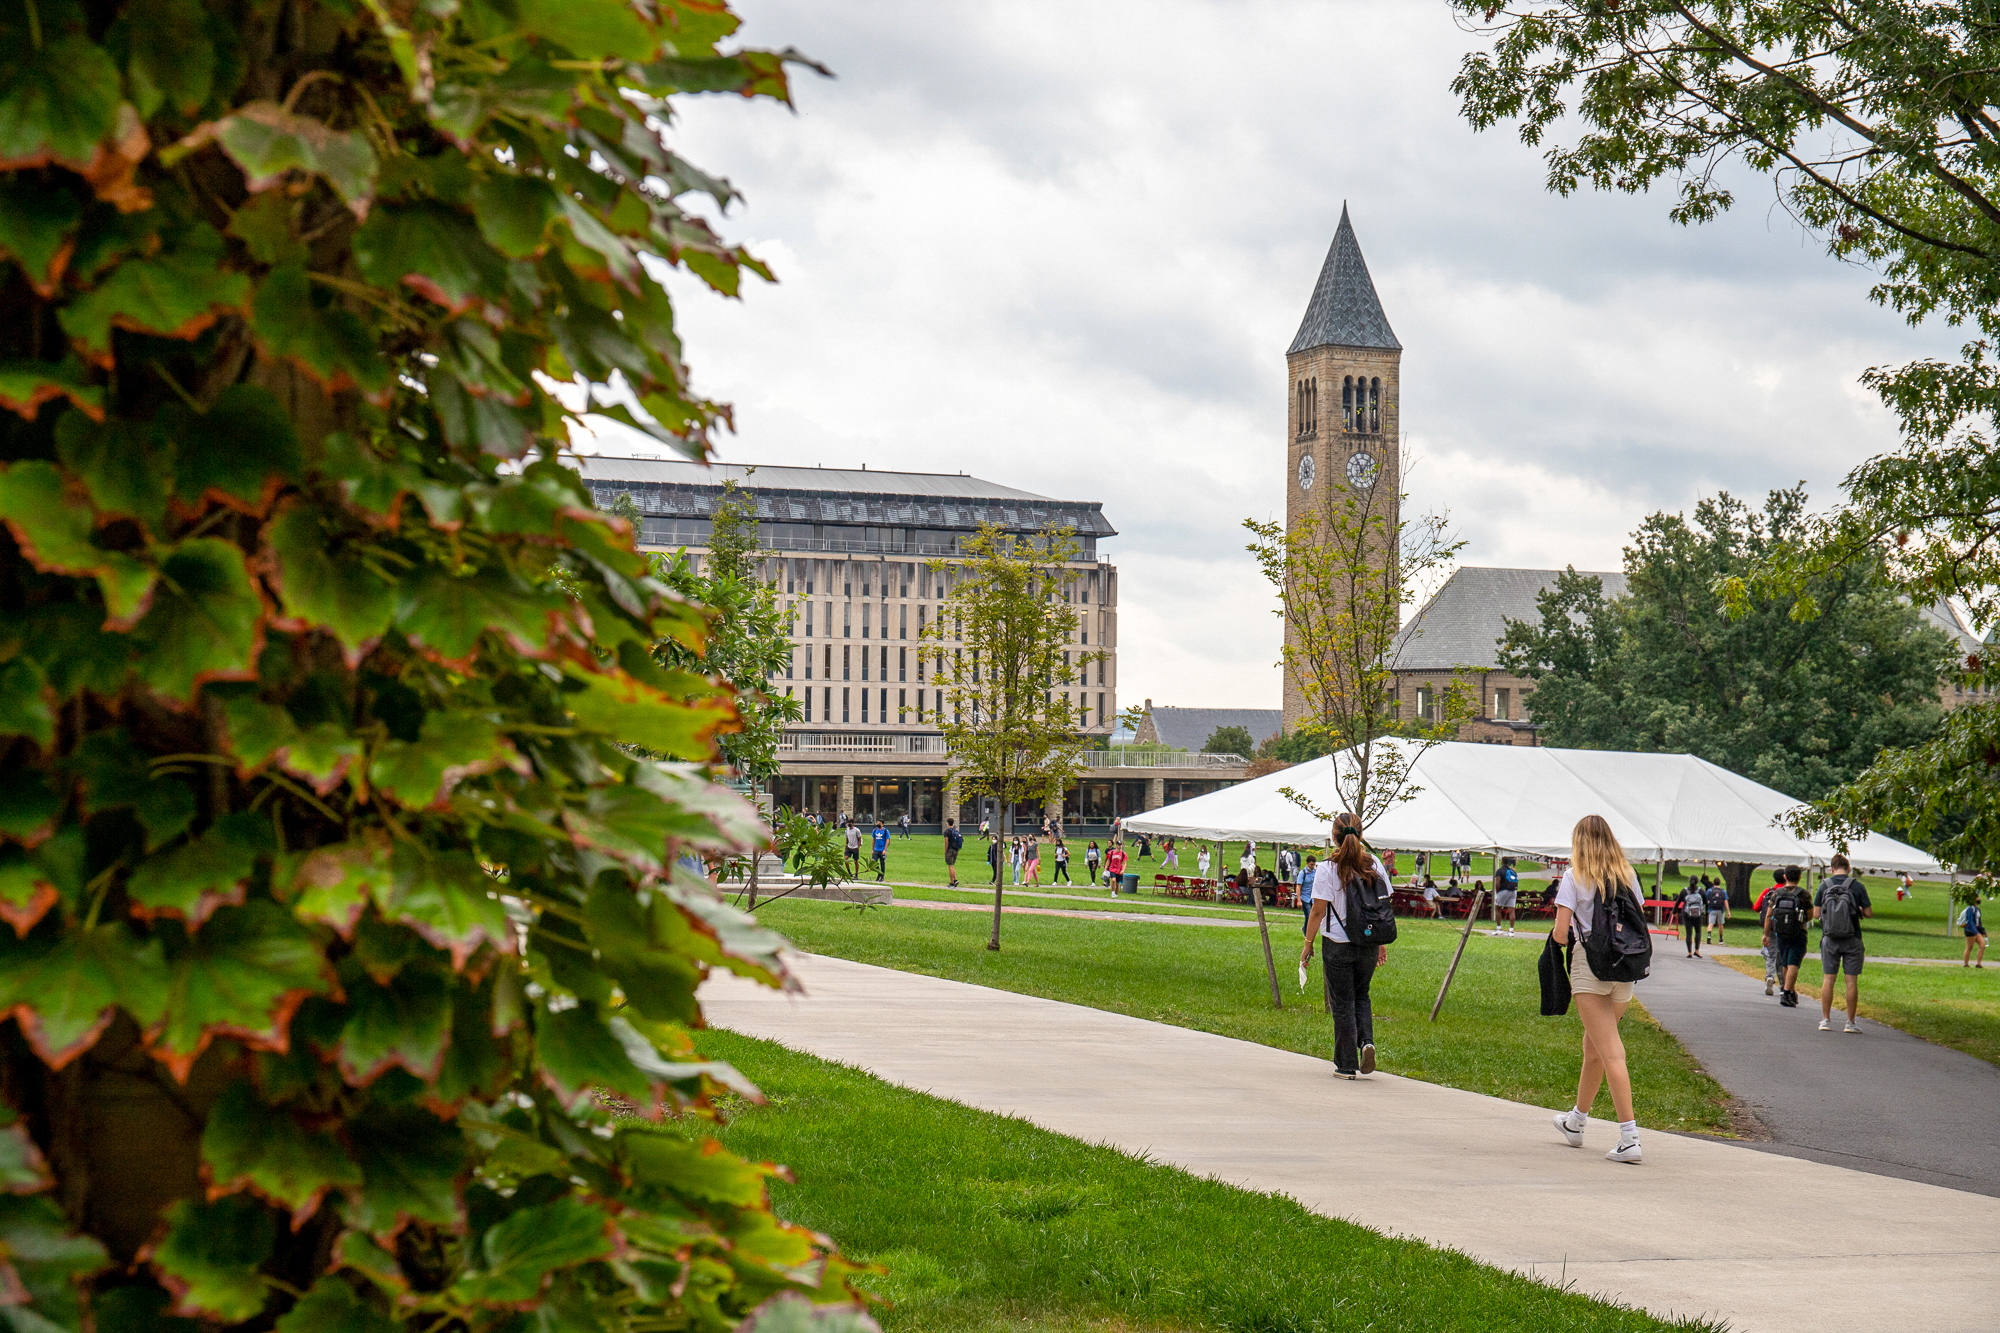 Cornell Fall 2022 Calendar U.s. News And World Report Places Cornell 17Th In 2022 Annual Rankings |  The Cornell Daily Sun